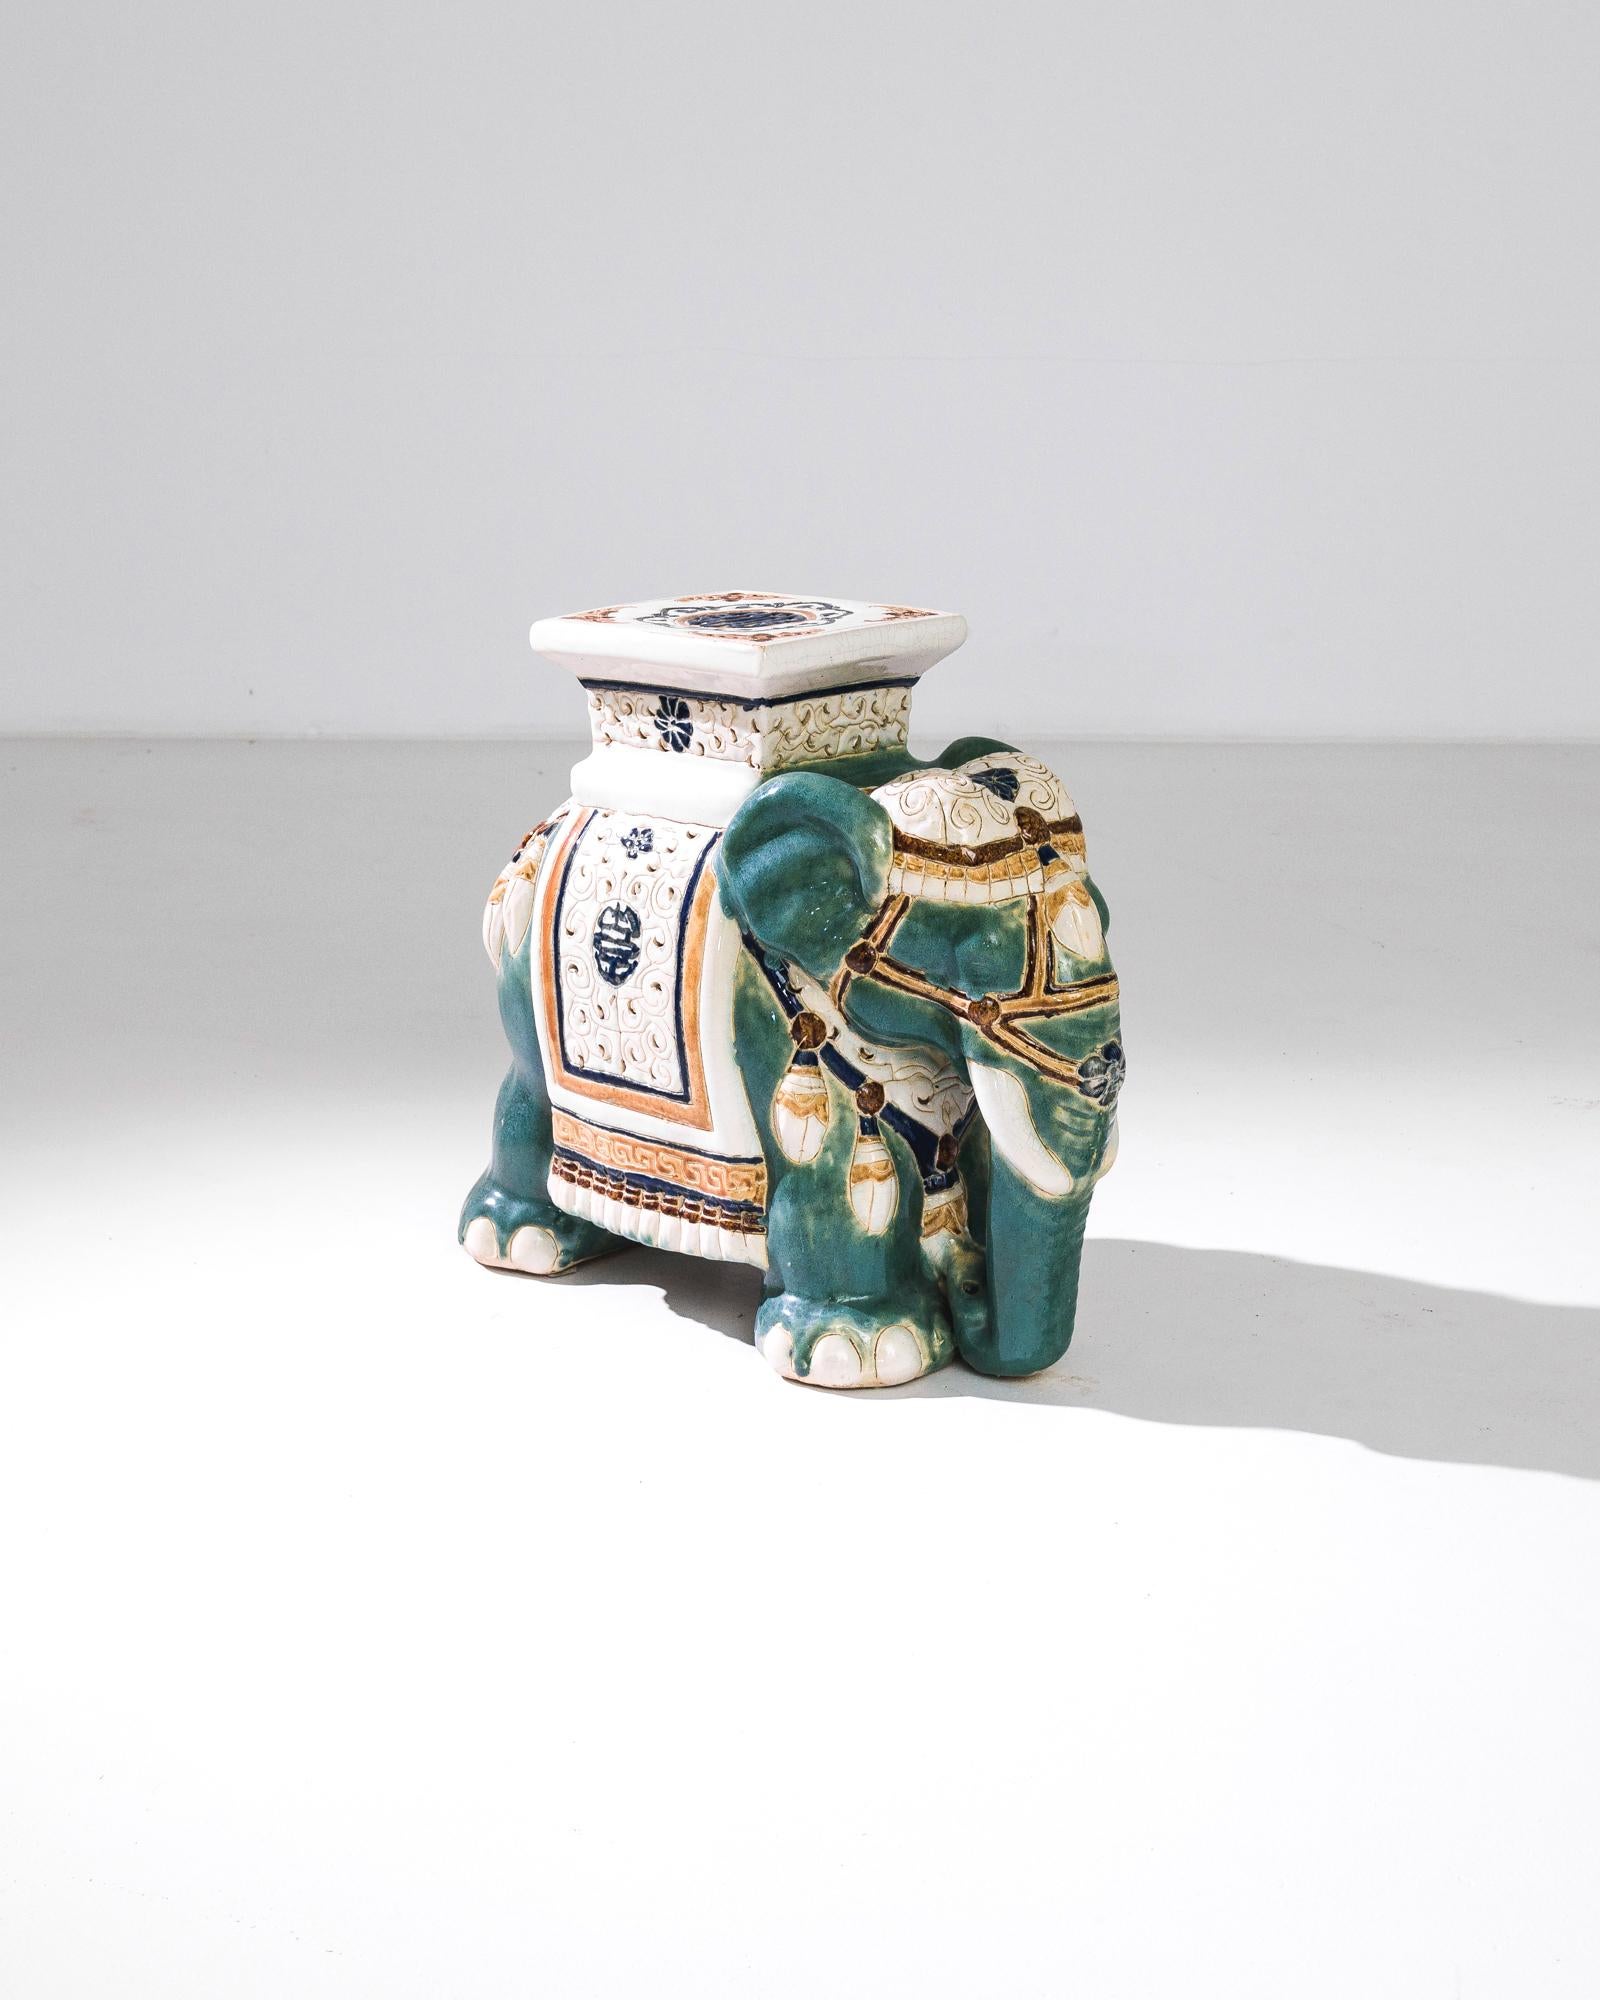 A ceramic decoration from 1960s France in the shape of an elephant. A saddle seat and blanket are glazed in whites, greens and earth tones; the assortment of delicate patterns — reflecting Chinese and Arabic influences — suggest the romance of the